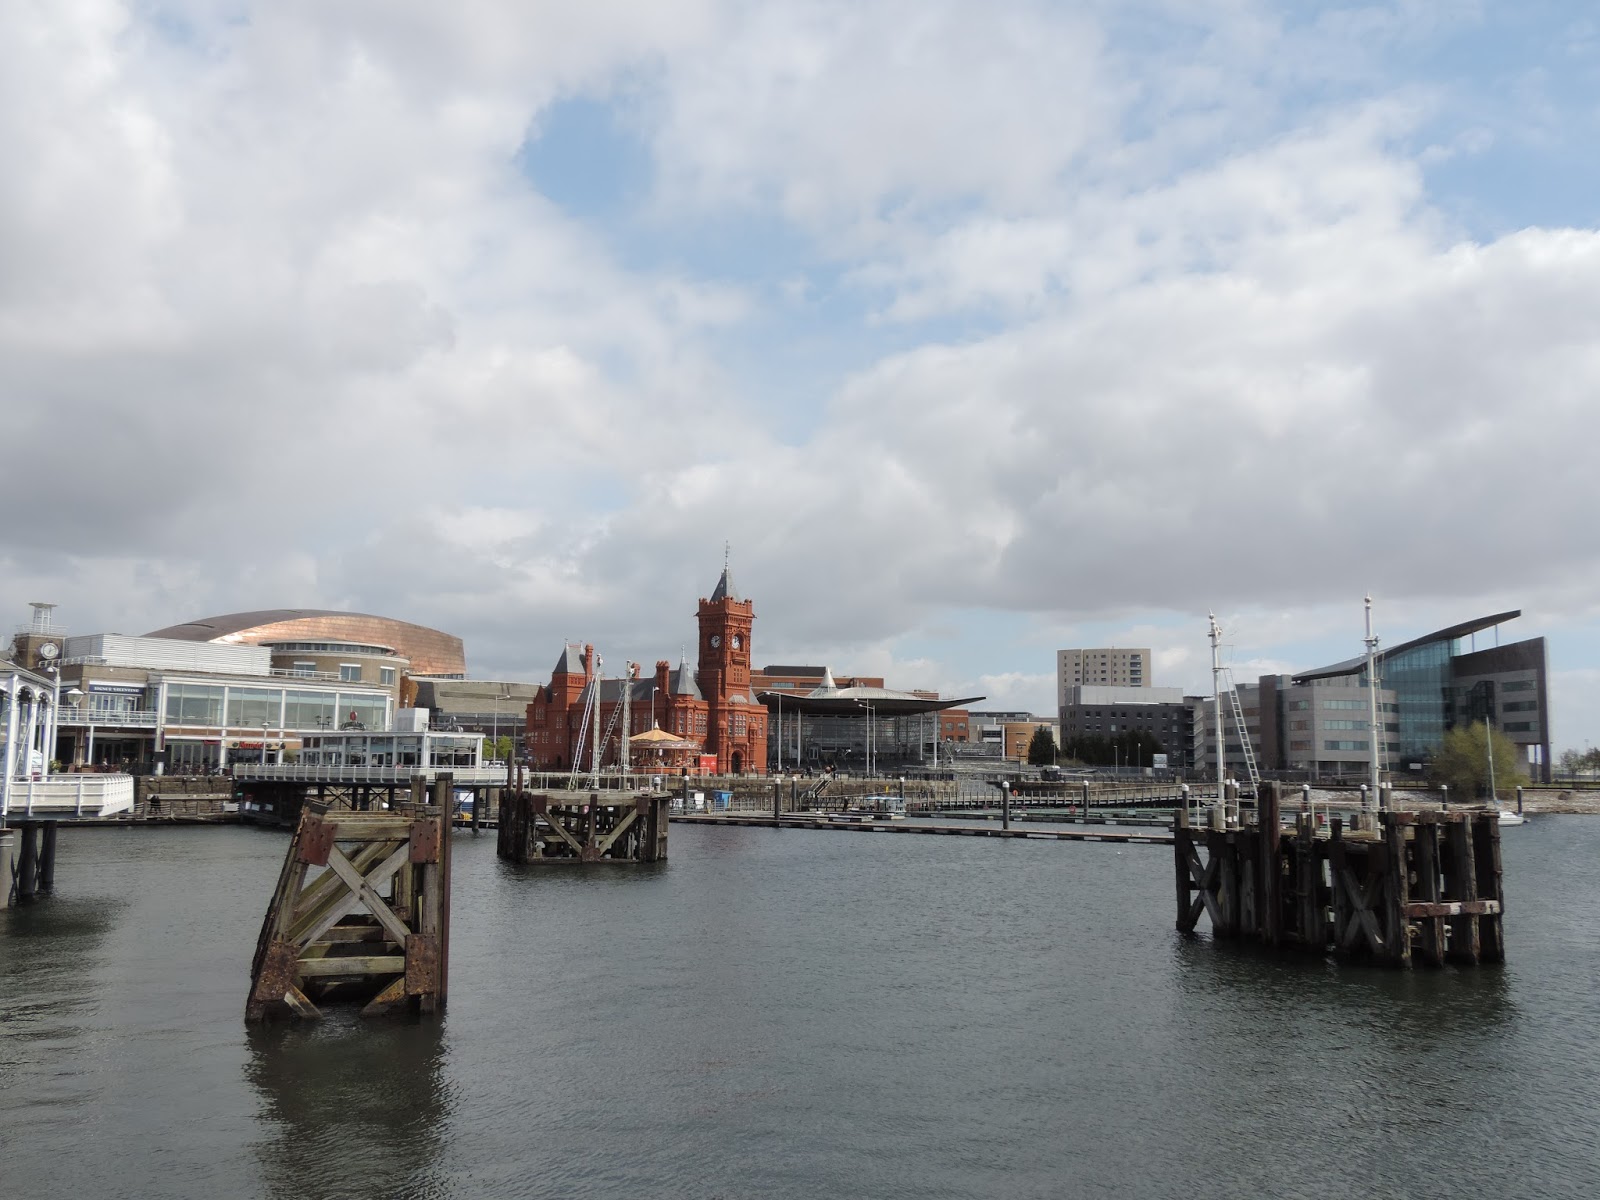 Photographic Allsorts: Mermaid Quay Cardiff Bay on a chilly May morning